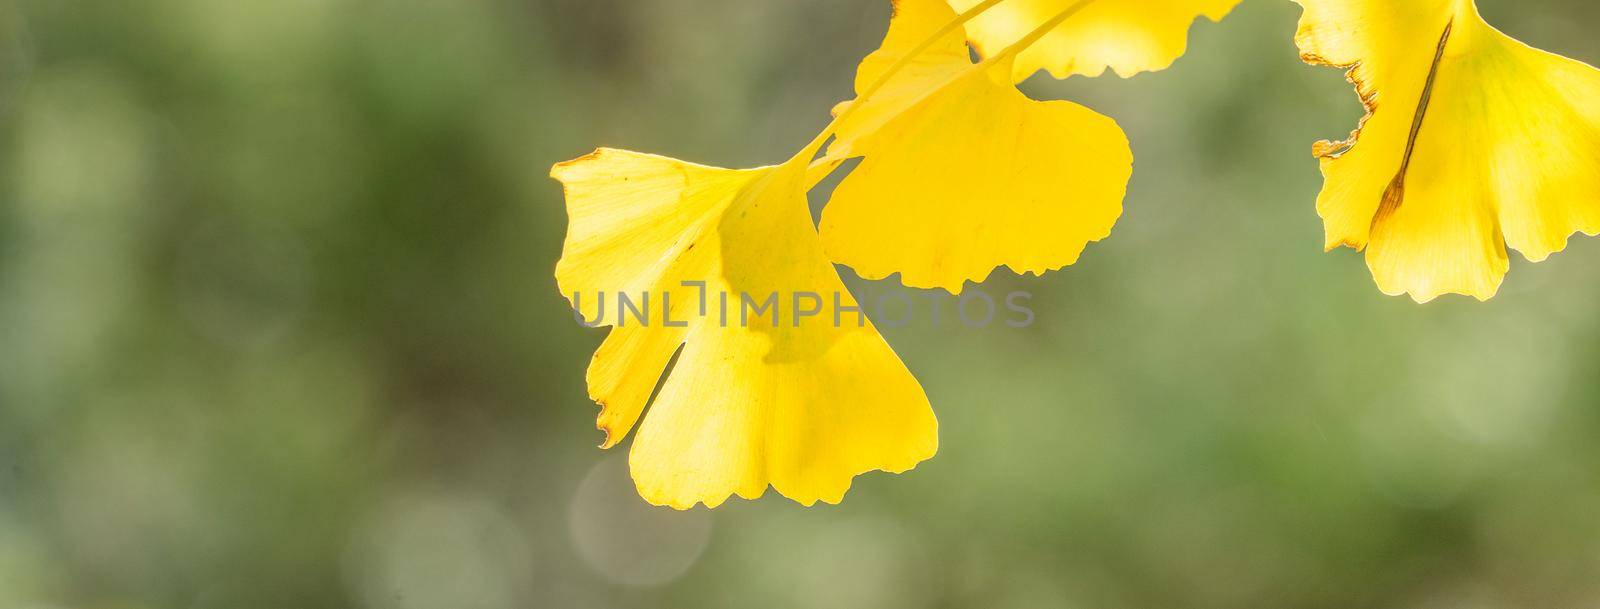 Design concept - Beautiful yellow ginkgo, gingko biloba tree leaf in autumn season in sunny day with sunlight, close up, bokeh, blurry background. by ROMIXIMAGE